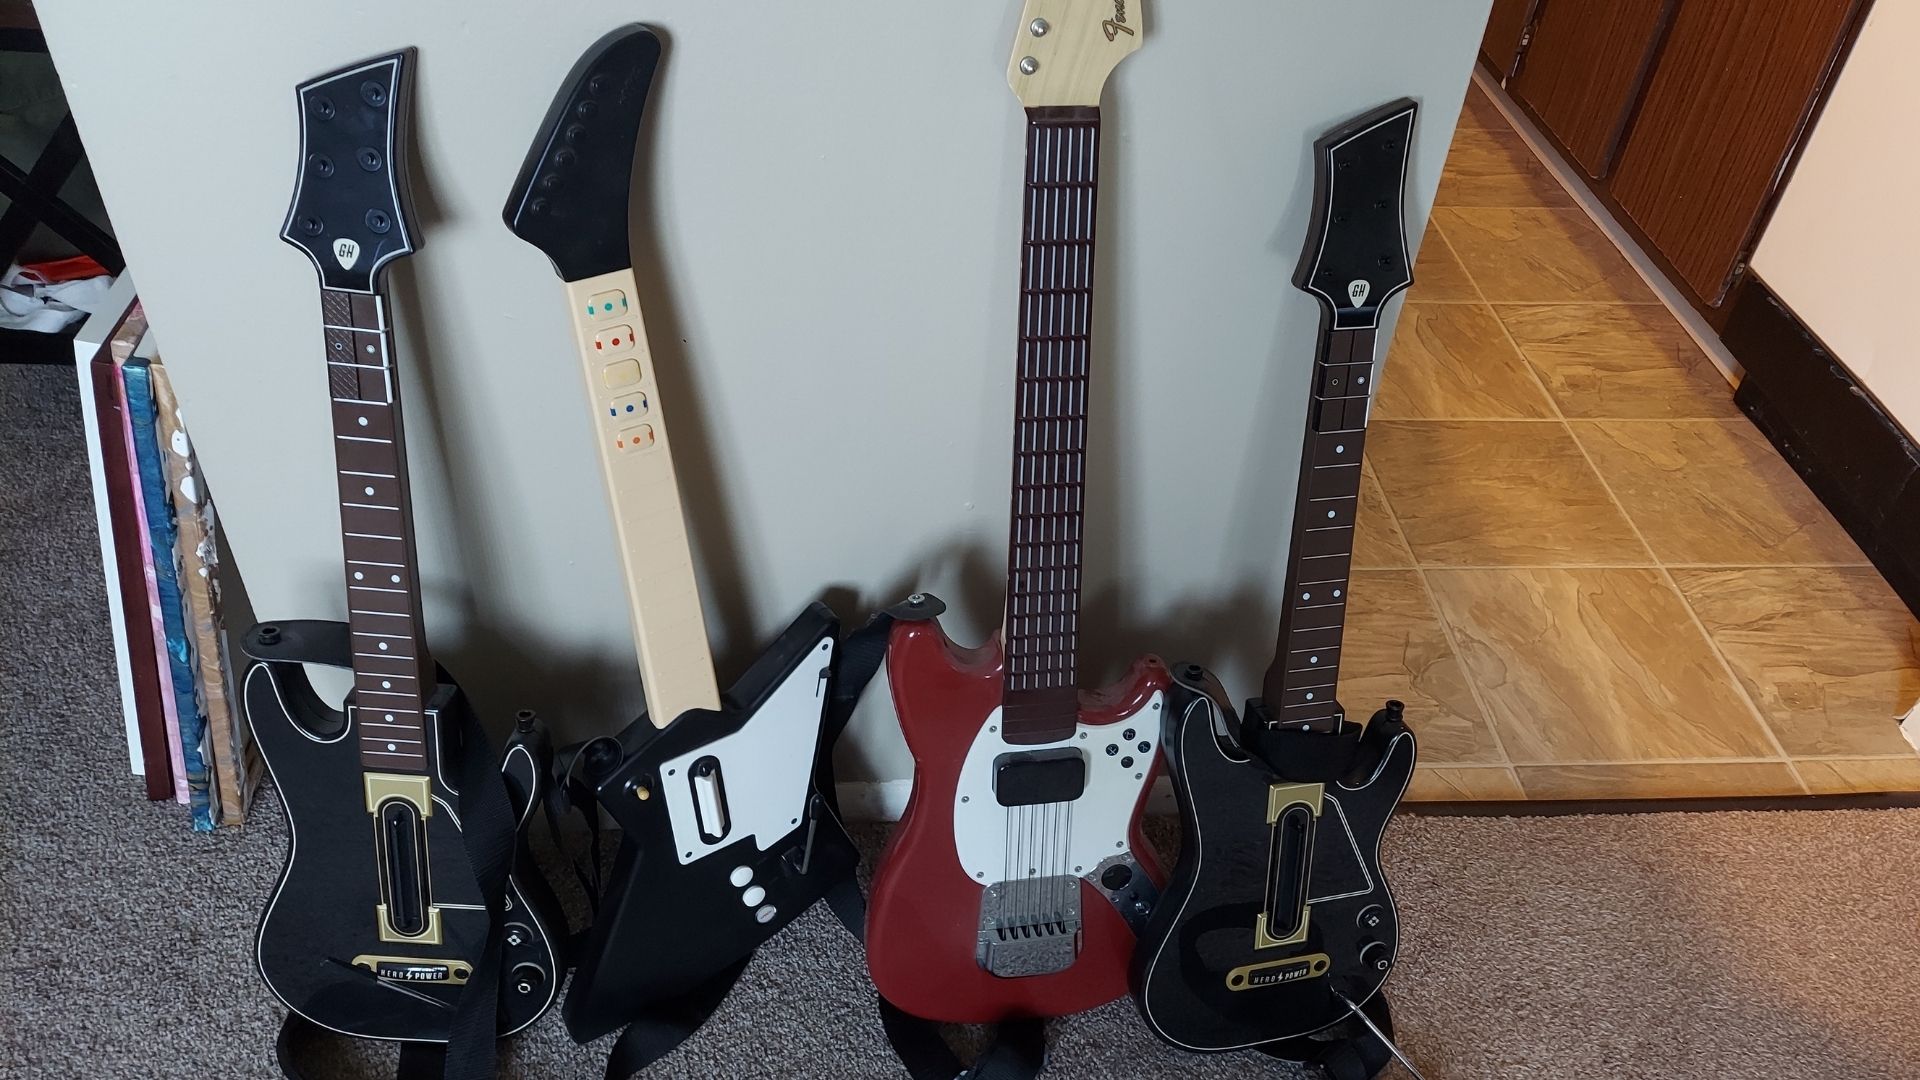 My partner has a lot of guitars, only the one second from the left works.  (Photo: Kotaku)